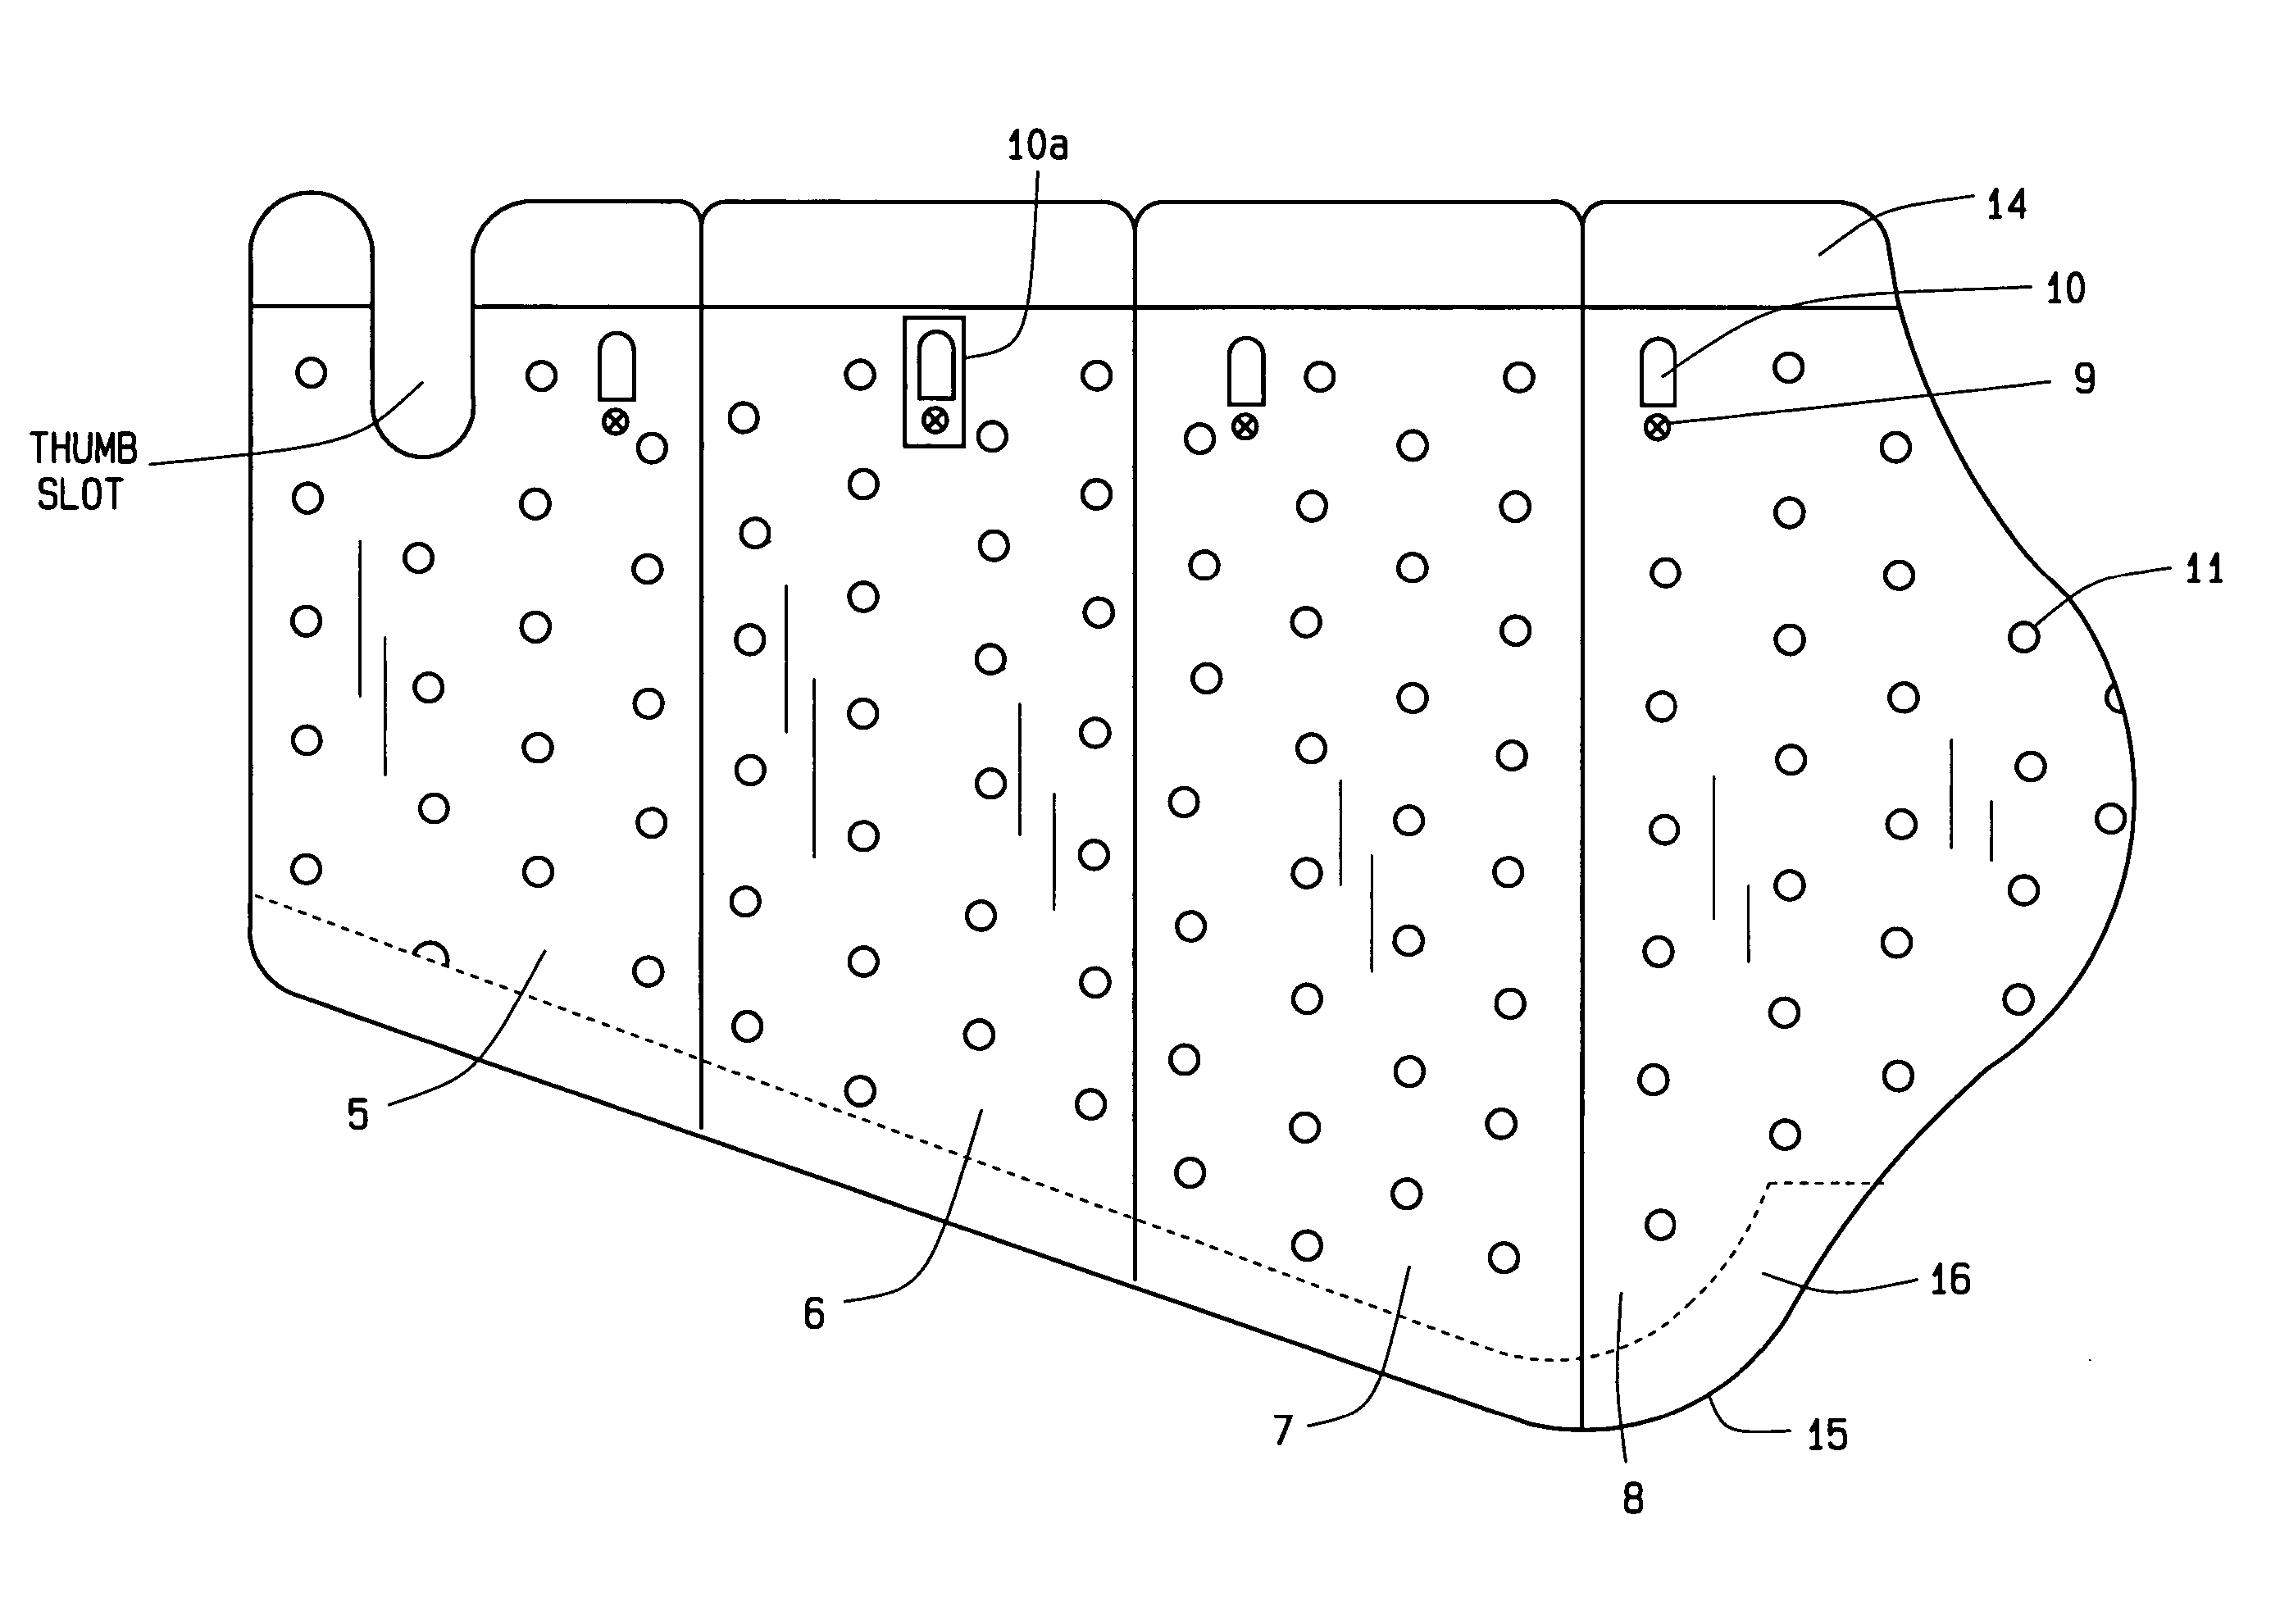 Segmented pneumatic pad for regulating pressure upon parts of the body during usage